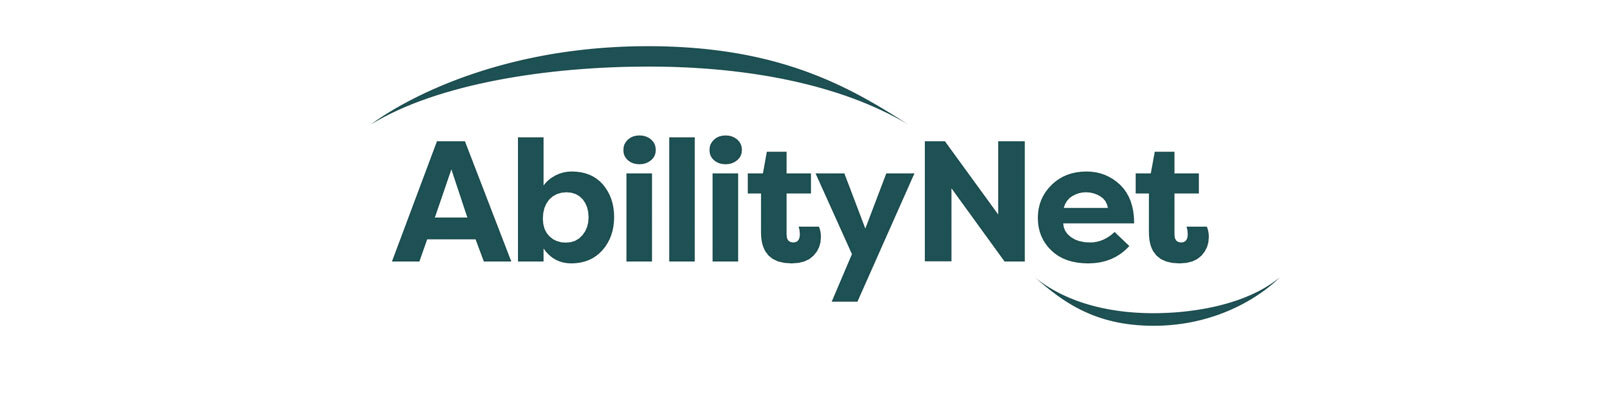 The AbilityNet Podcast: Disability. Technology. Inclusion.